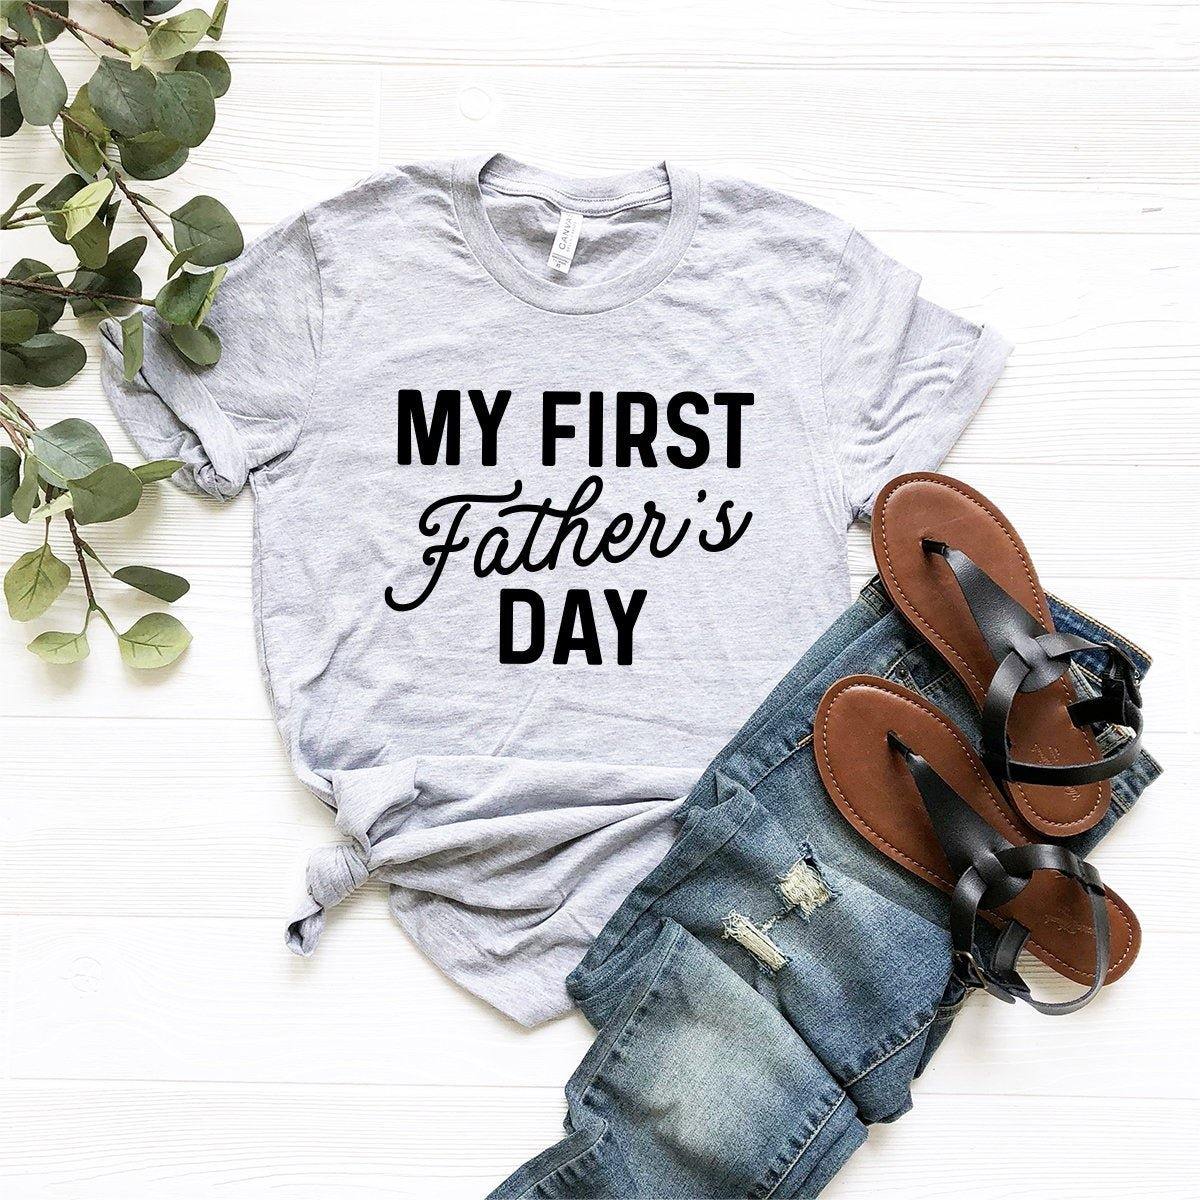 New Dad Shirt, New Dad Gift, Gift For New Dad, Shirt For New Dad, My First Father's Day Shirt, Funny New Dad Tee, New Dad Fathers Day Shirt - Fastdeliverytees.com